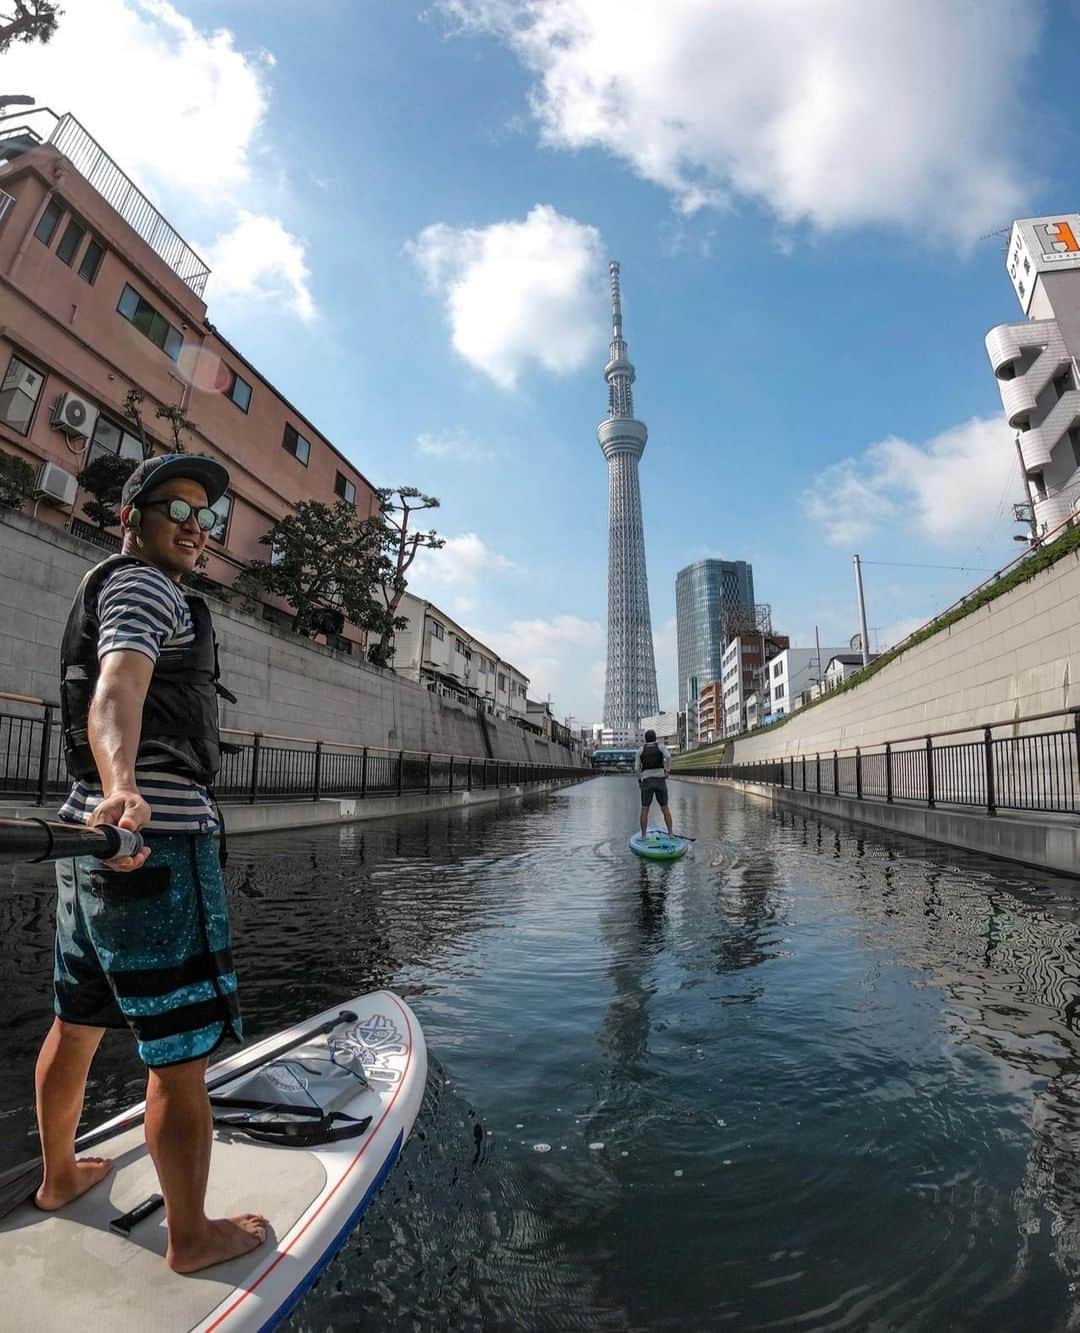 BONXのインスタグラム：「Did you know Tokyo has many waterways? Next time you are in Tokyo, probably you want to consider taking SUP to tour around. And don't forget your BONX to stay connected!⠀ #GoBonx #GoMakeNoise⠀ .⠀ .⠀ .⠀ .⠀ .⠀ #Bonx #technology #extreme #communication #gear #grouptalk #sportstech #sportstechnology #headphones #wirelessheadphones #sup #tokyo #tokyoskytree #waterway #hero7」